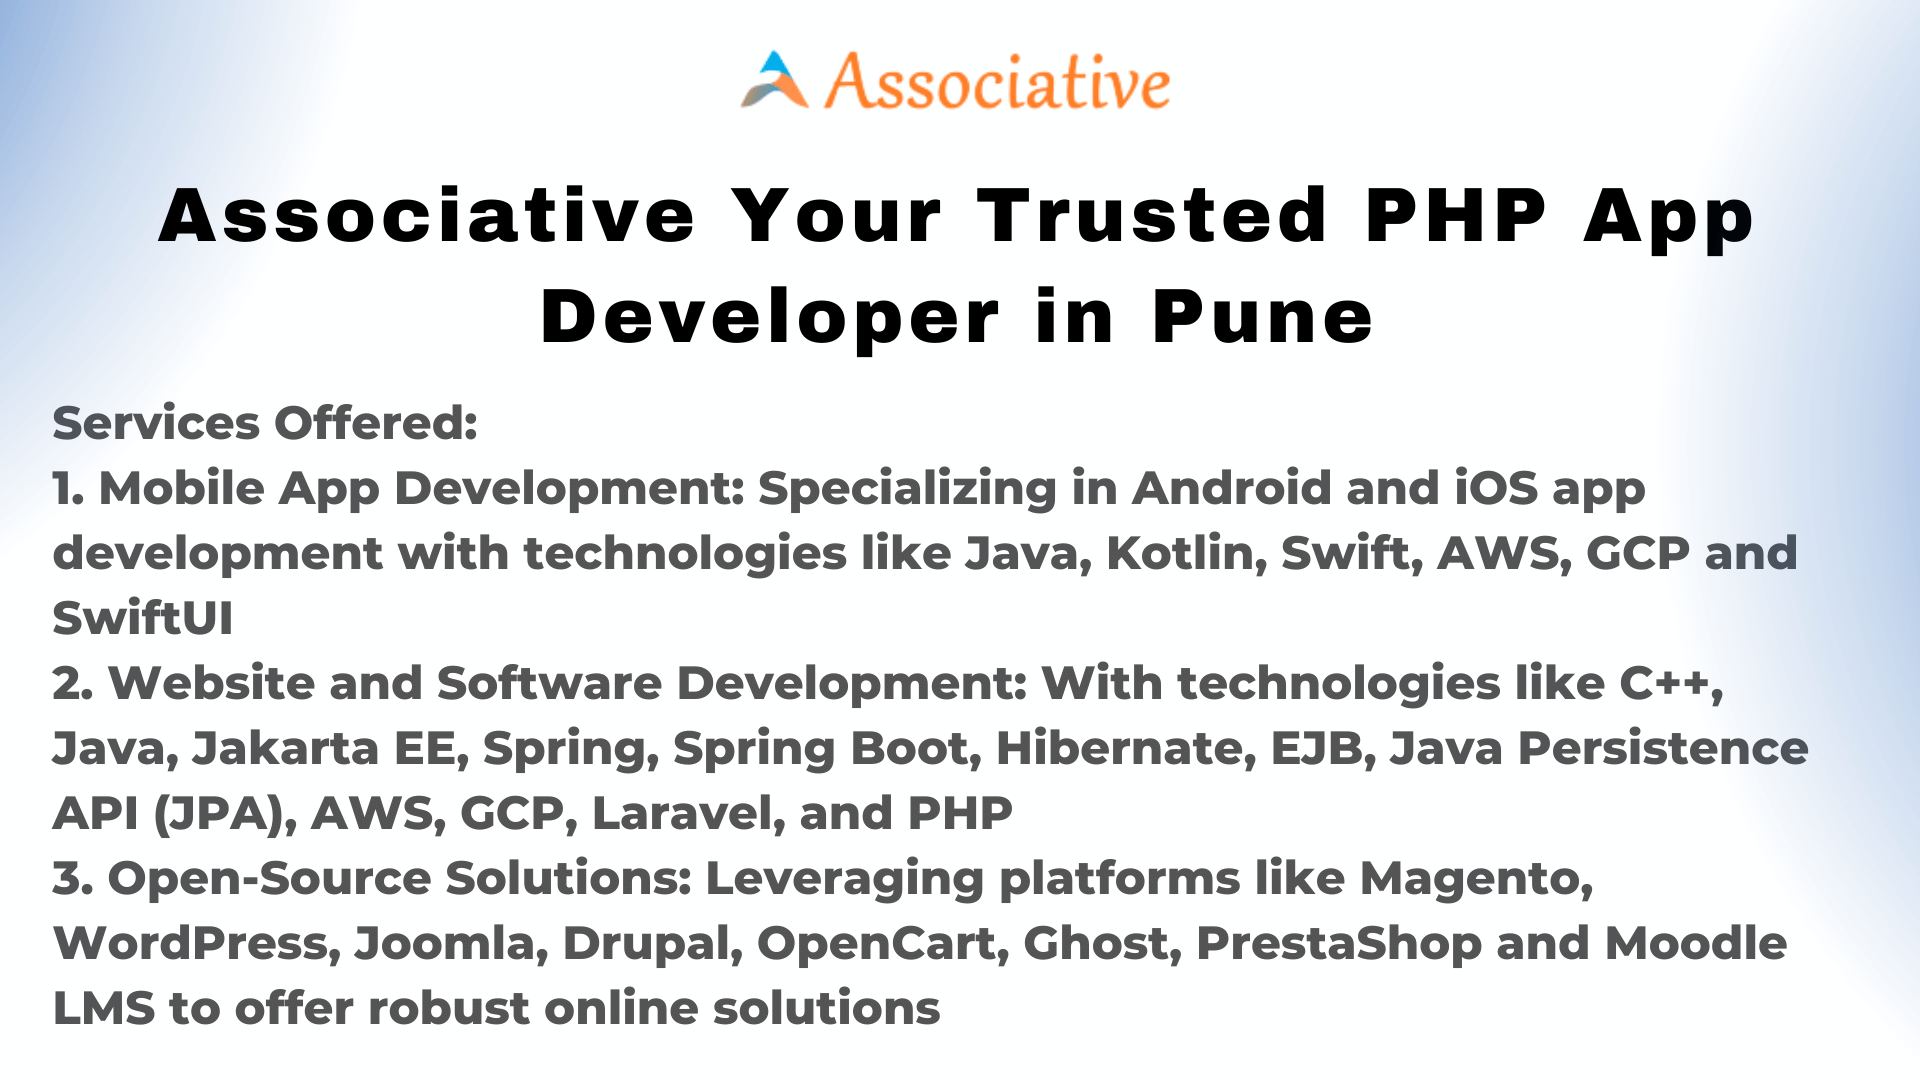 Associative Your Trusted PHP App Developer in Pune